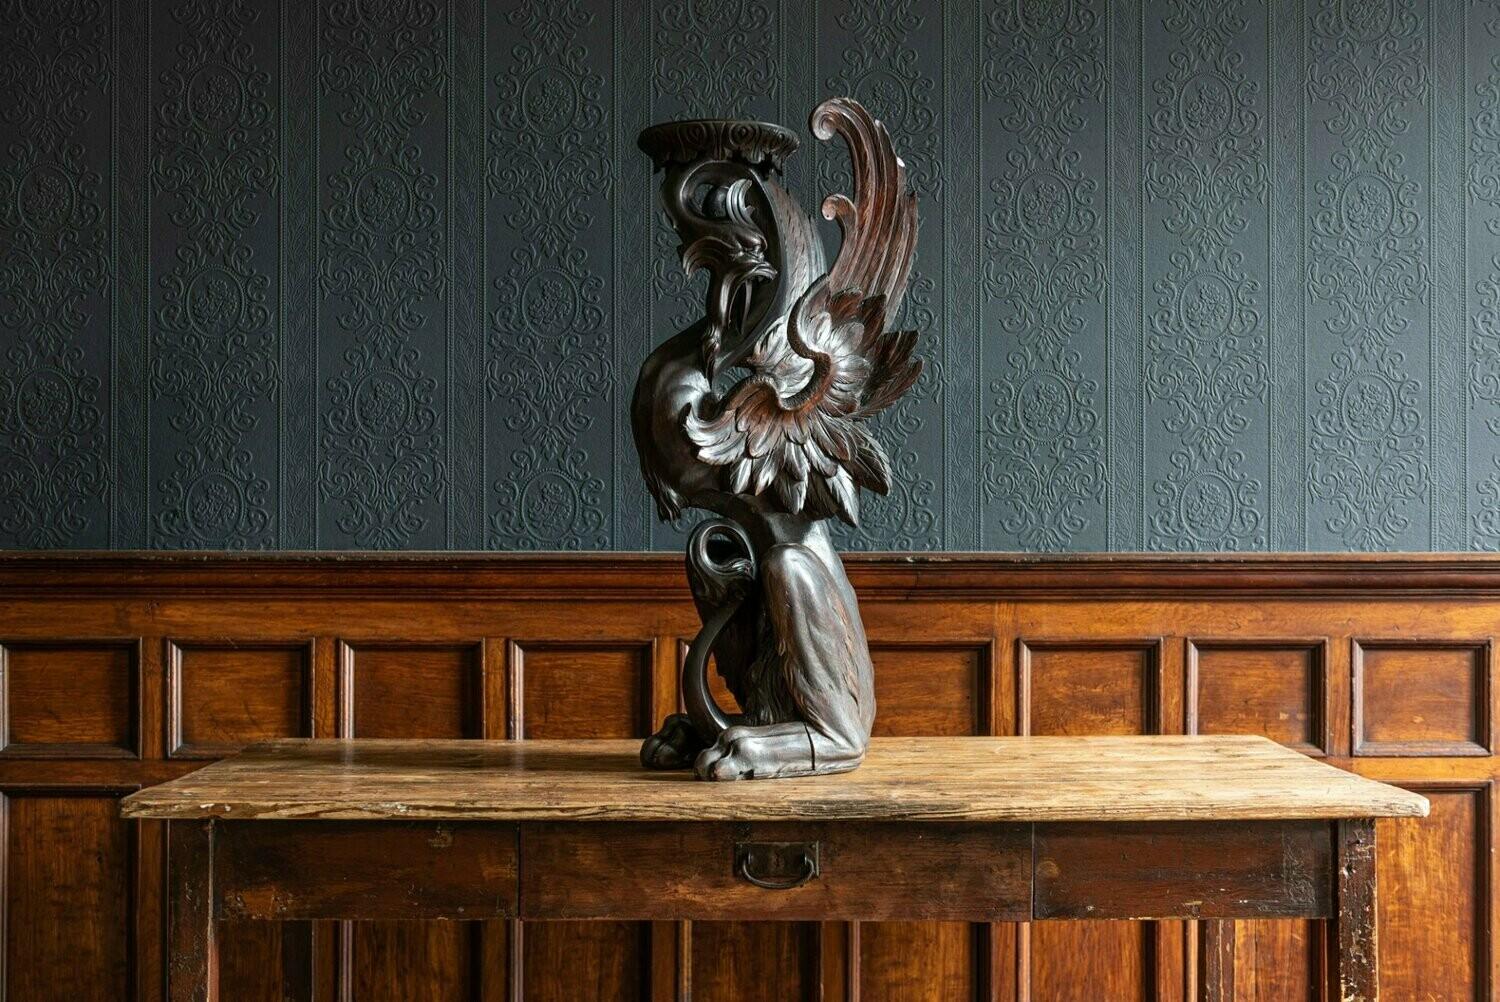 19th century finely carved oak pixiu form jardinière stand
A continental 19th century 19th century finely carved oak pixiu form jardinière stand, with its shaped top a possible later edition

A Chinese mythological creature, the Pixiu is a very